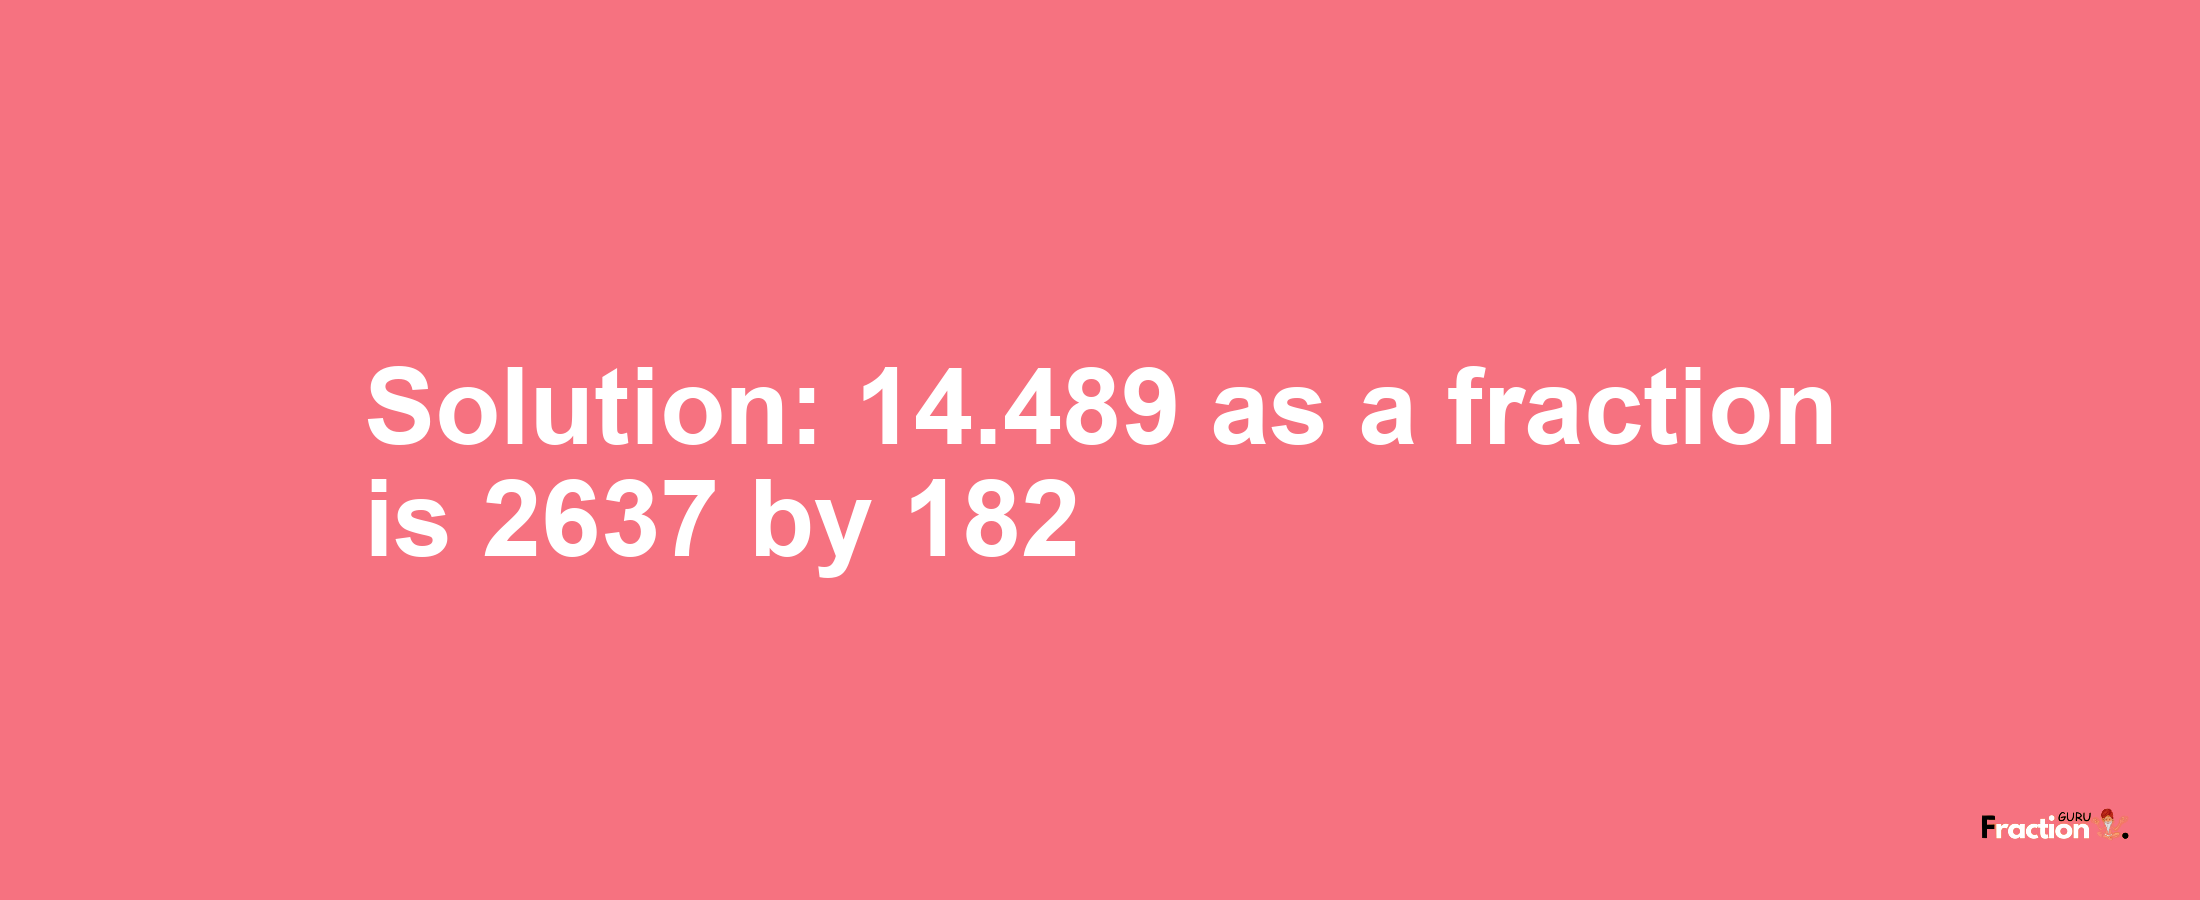 Solution:14.489 as a fraction is 2637/182